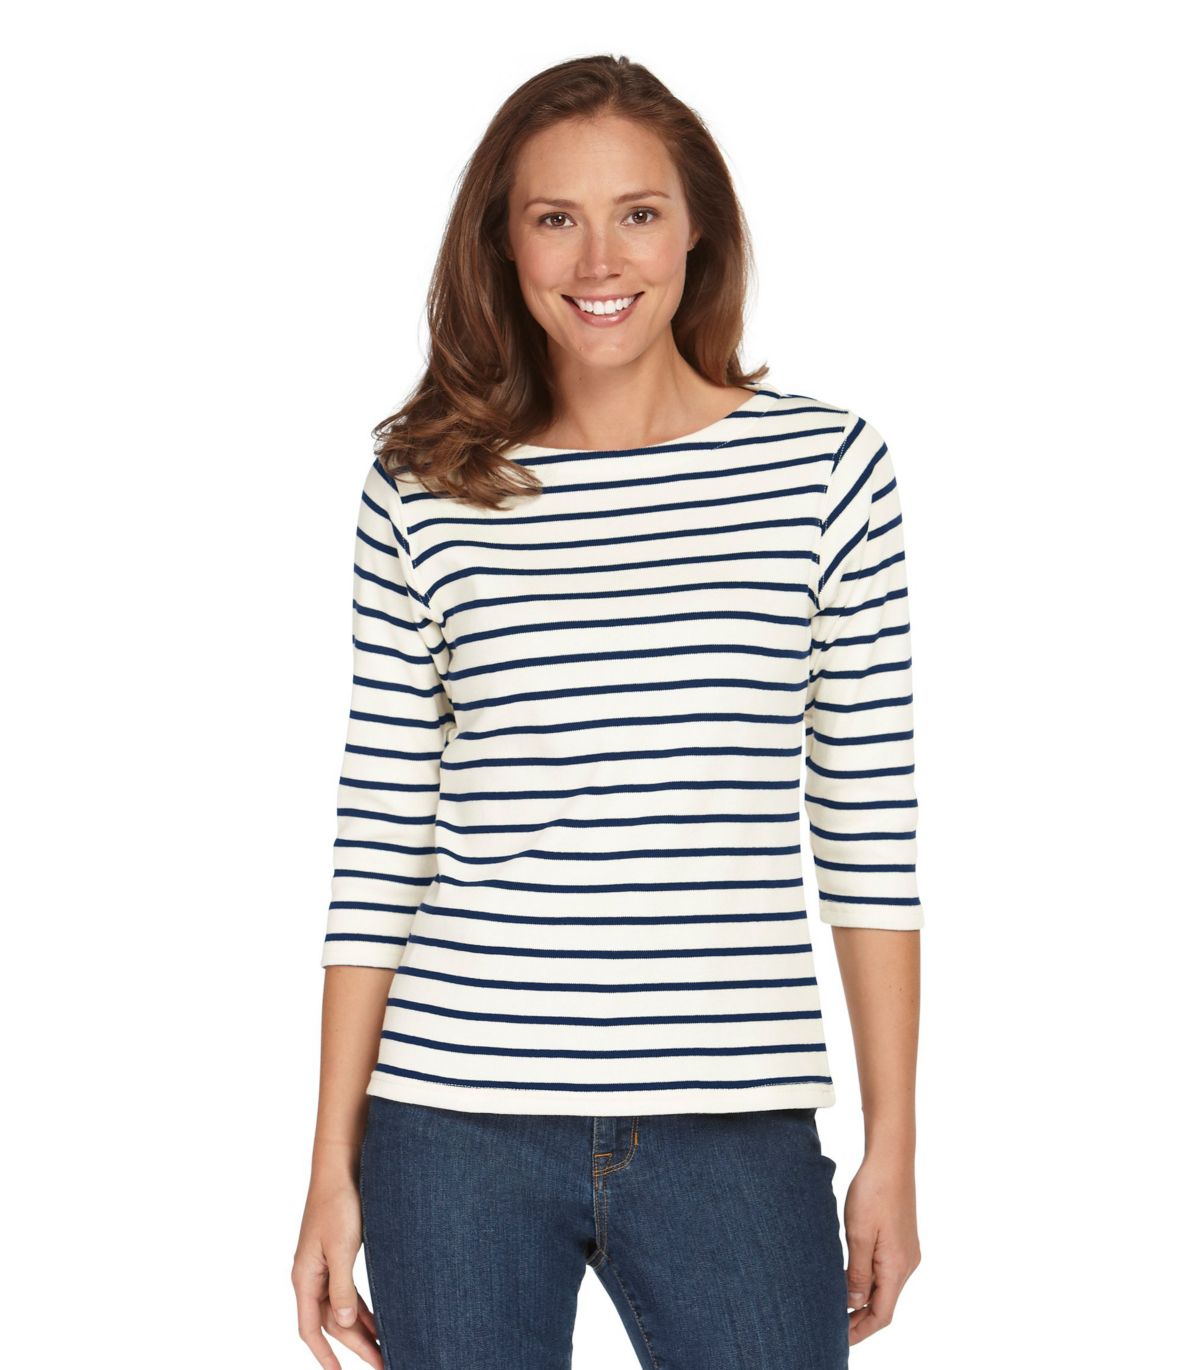 Women's French Sailor's Shirt, Three-Quarter-Sleeve Boatneck at L.L. Bean